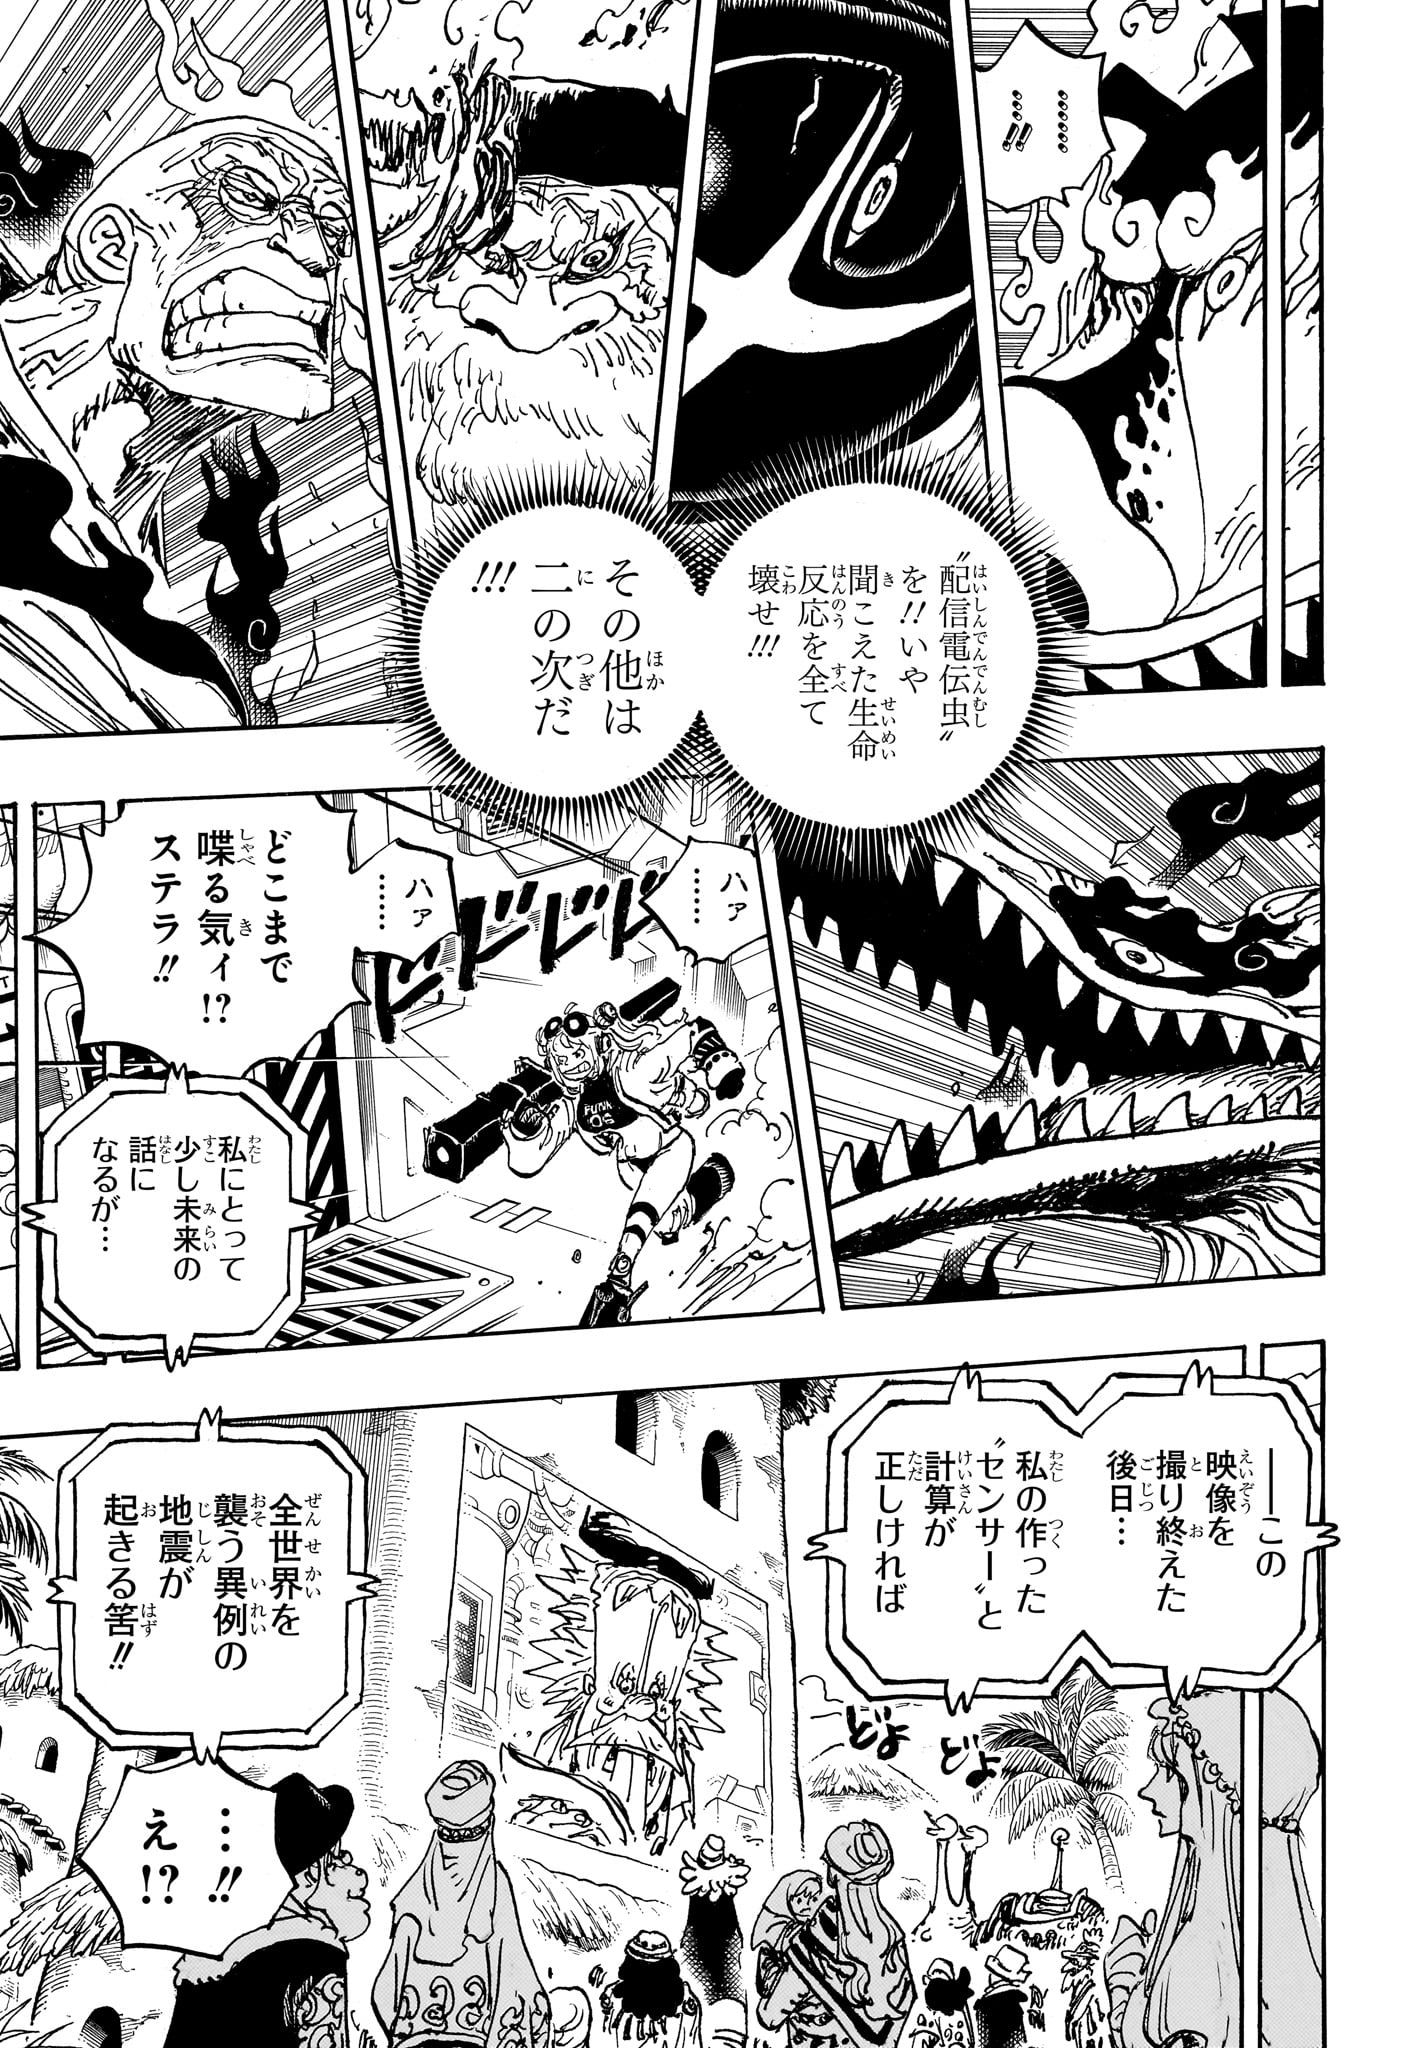 One Piece - Chapter 1114 - Page 5